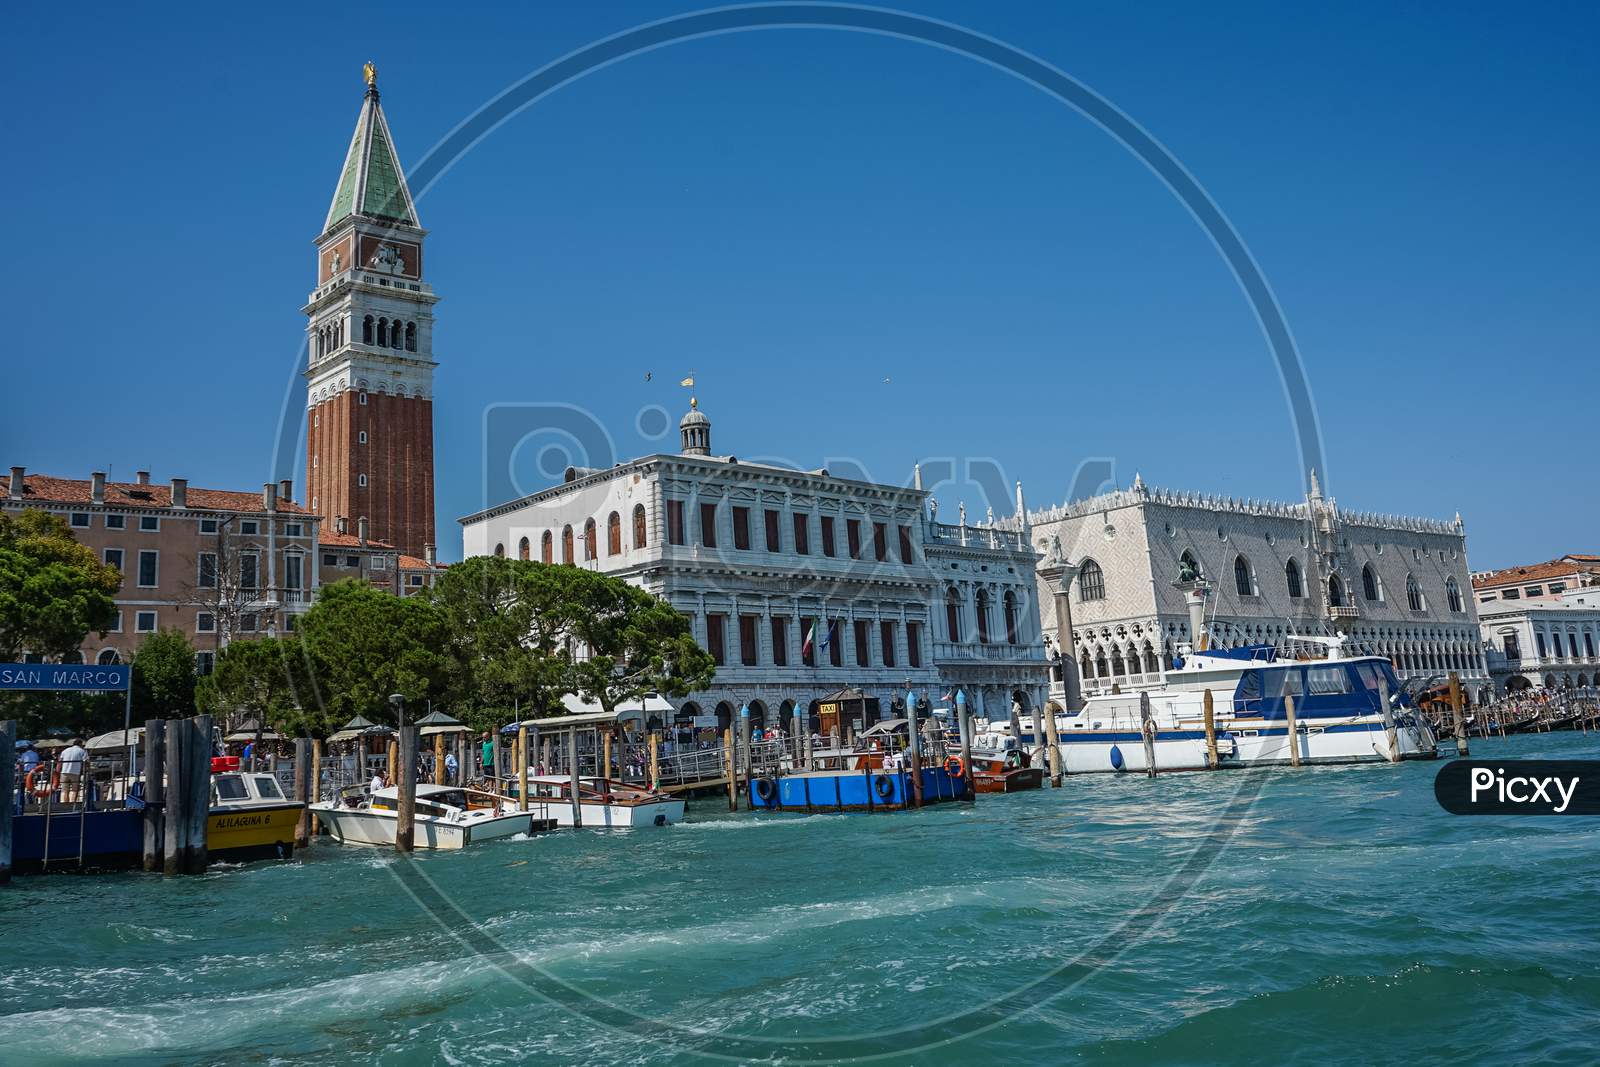 Venice, Italy - 01 July 2018: Piazza San Marco In Venice, Italy